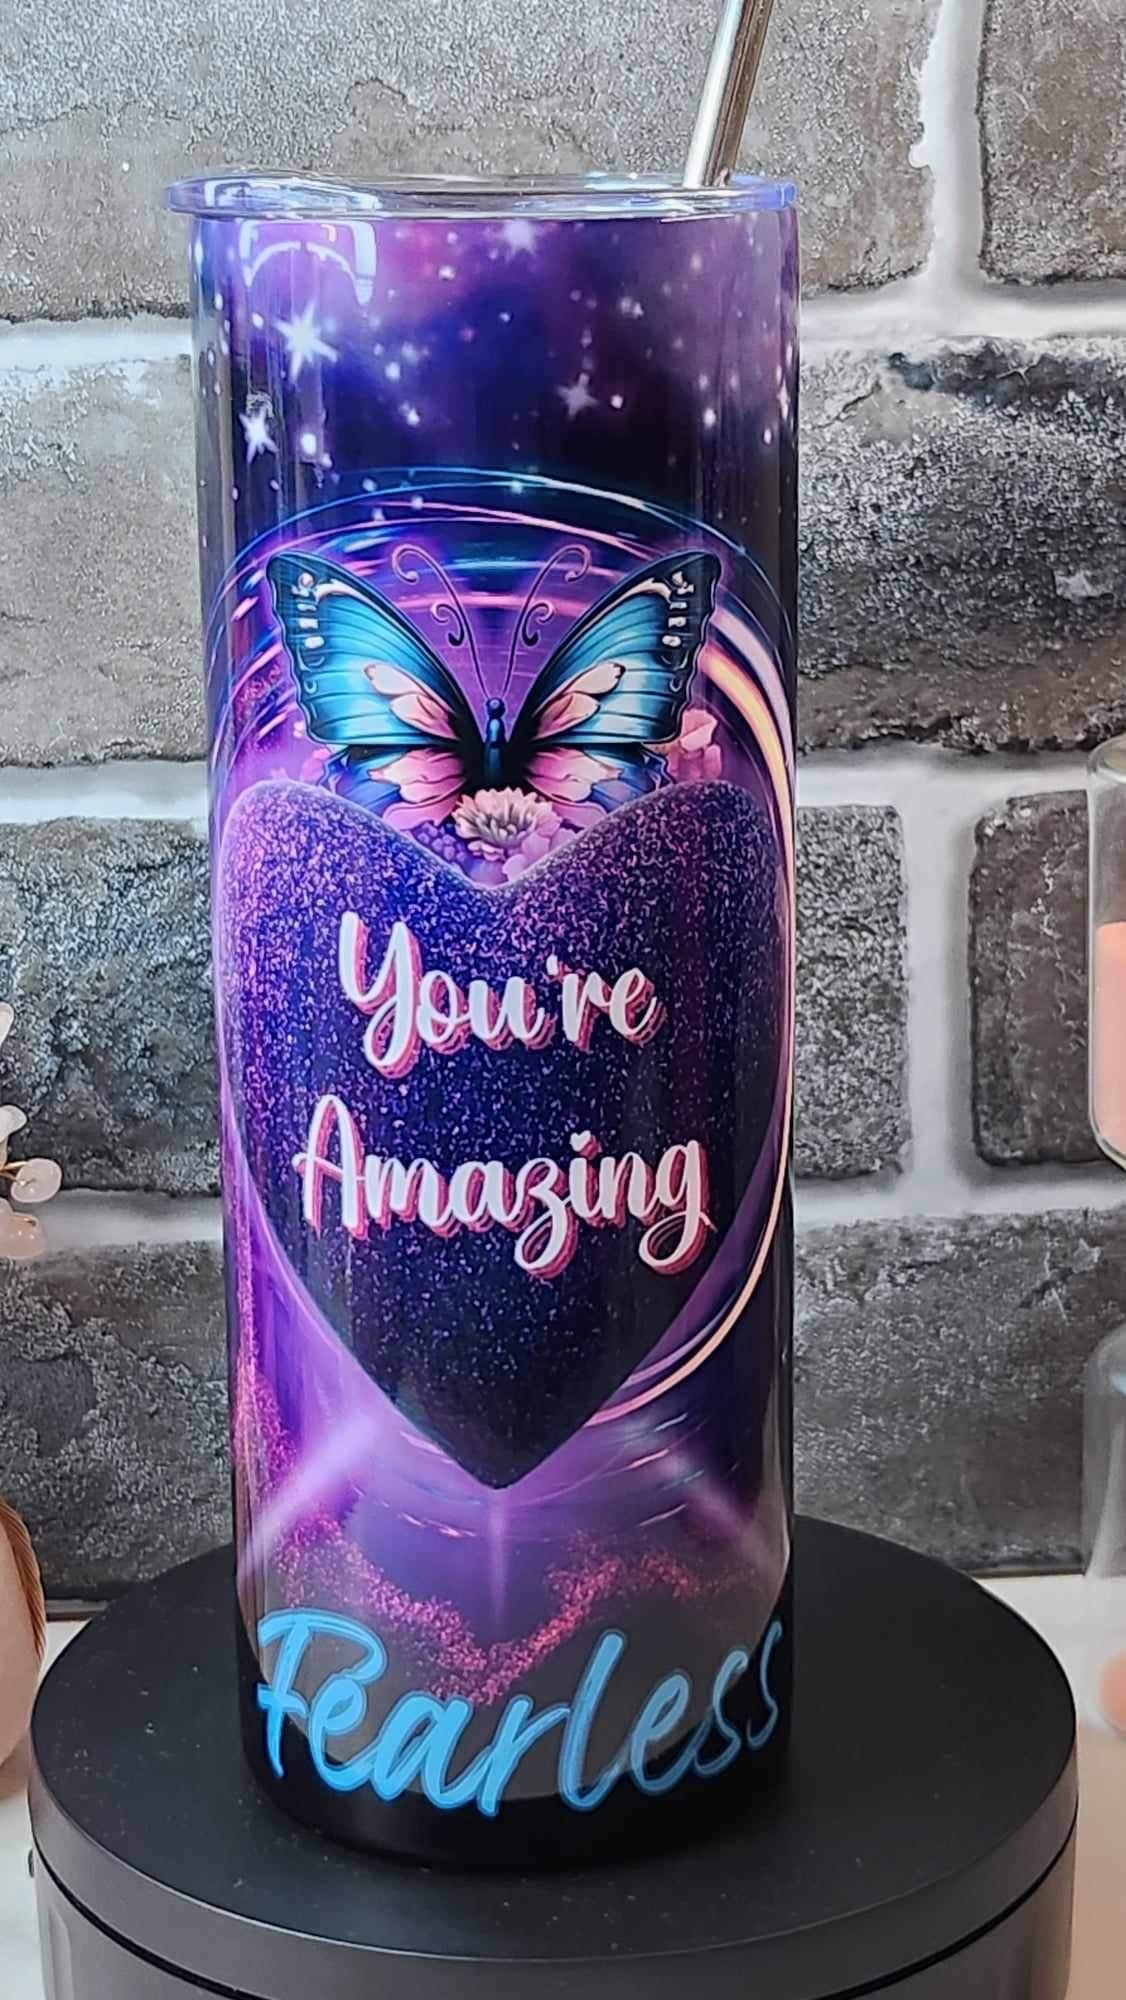 YOU'RE AMAZING 20oz Tumbler (not personalized)